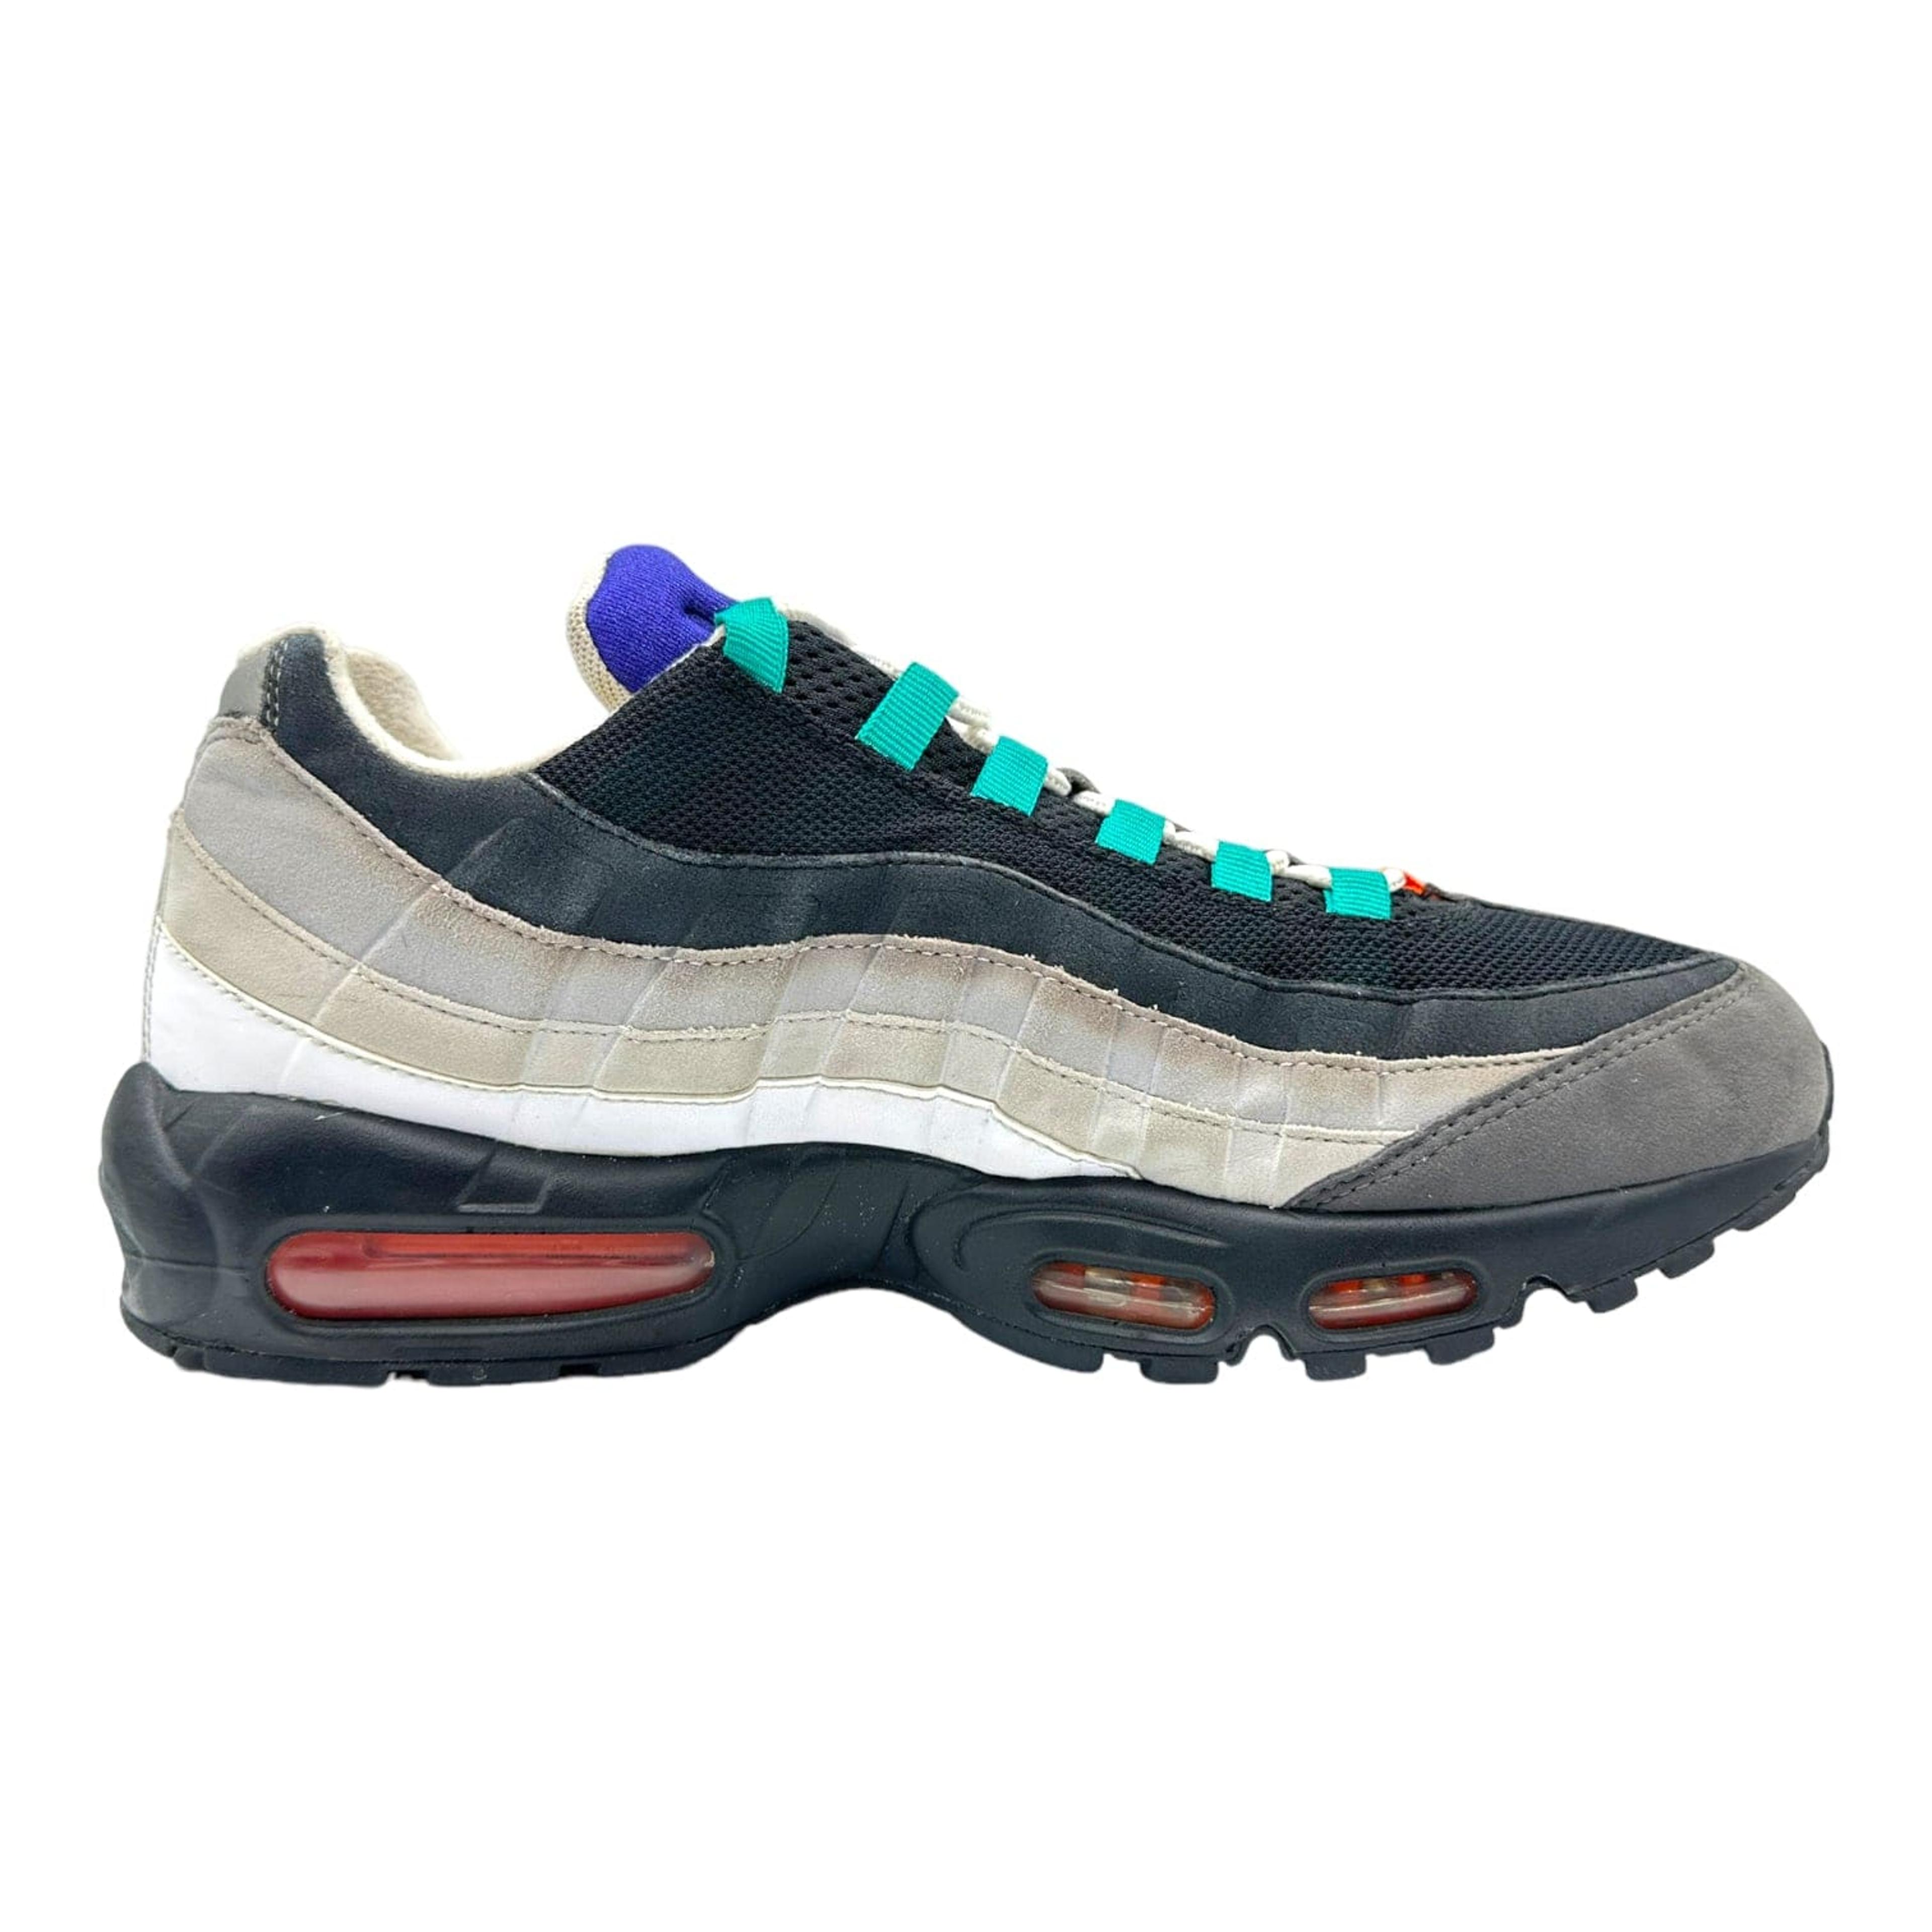 Alternate View 3 of Nike Air Max 95 What the Air Max Pre-Owned